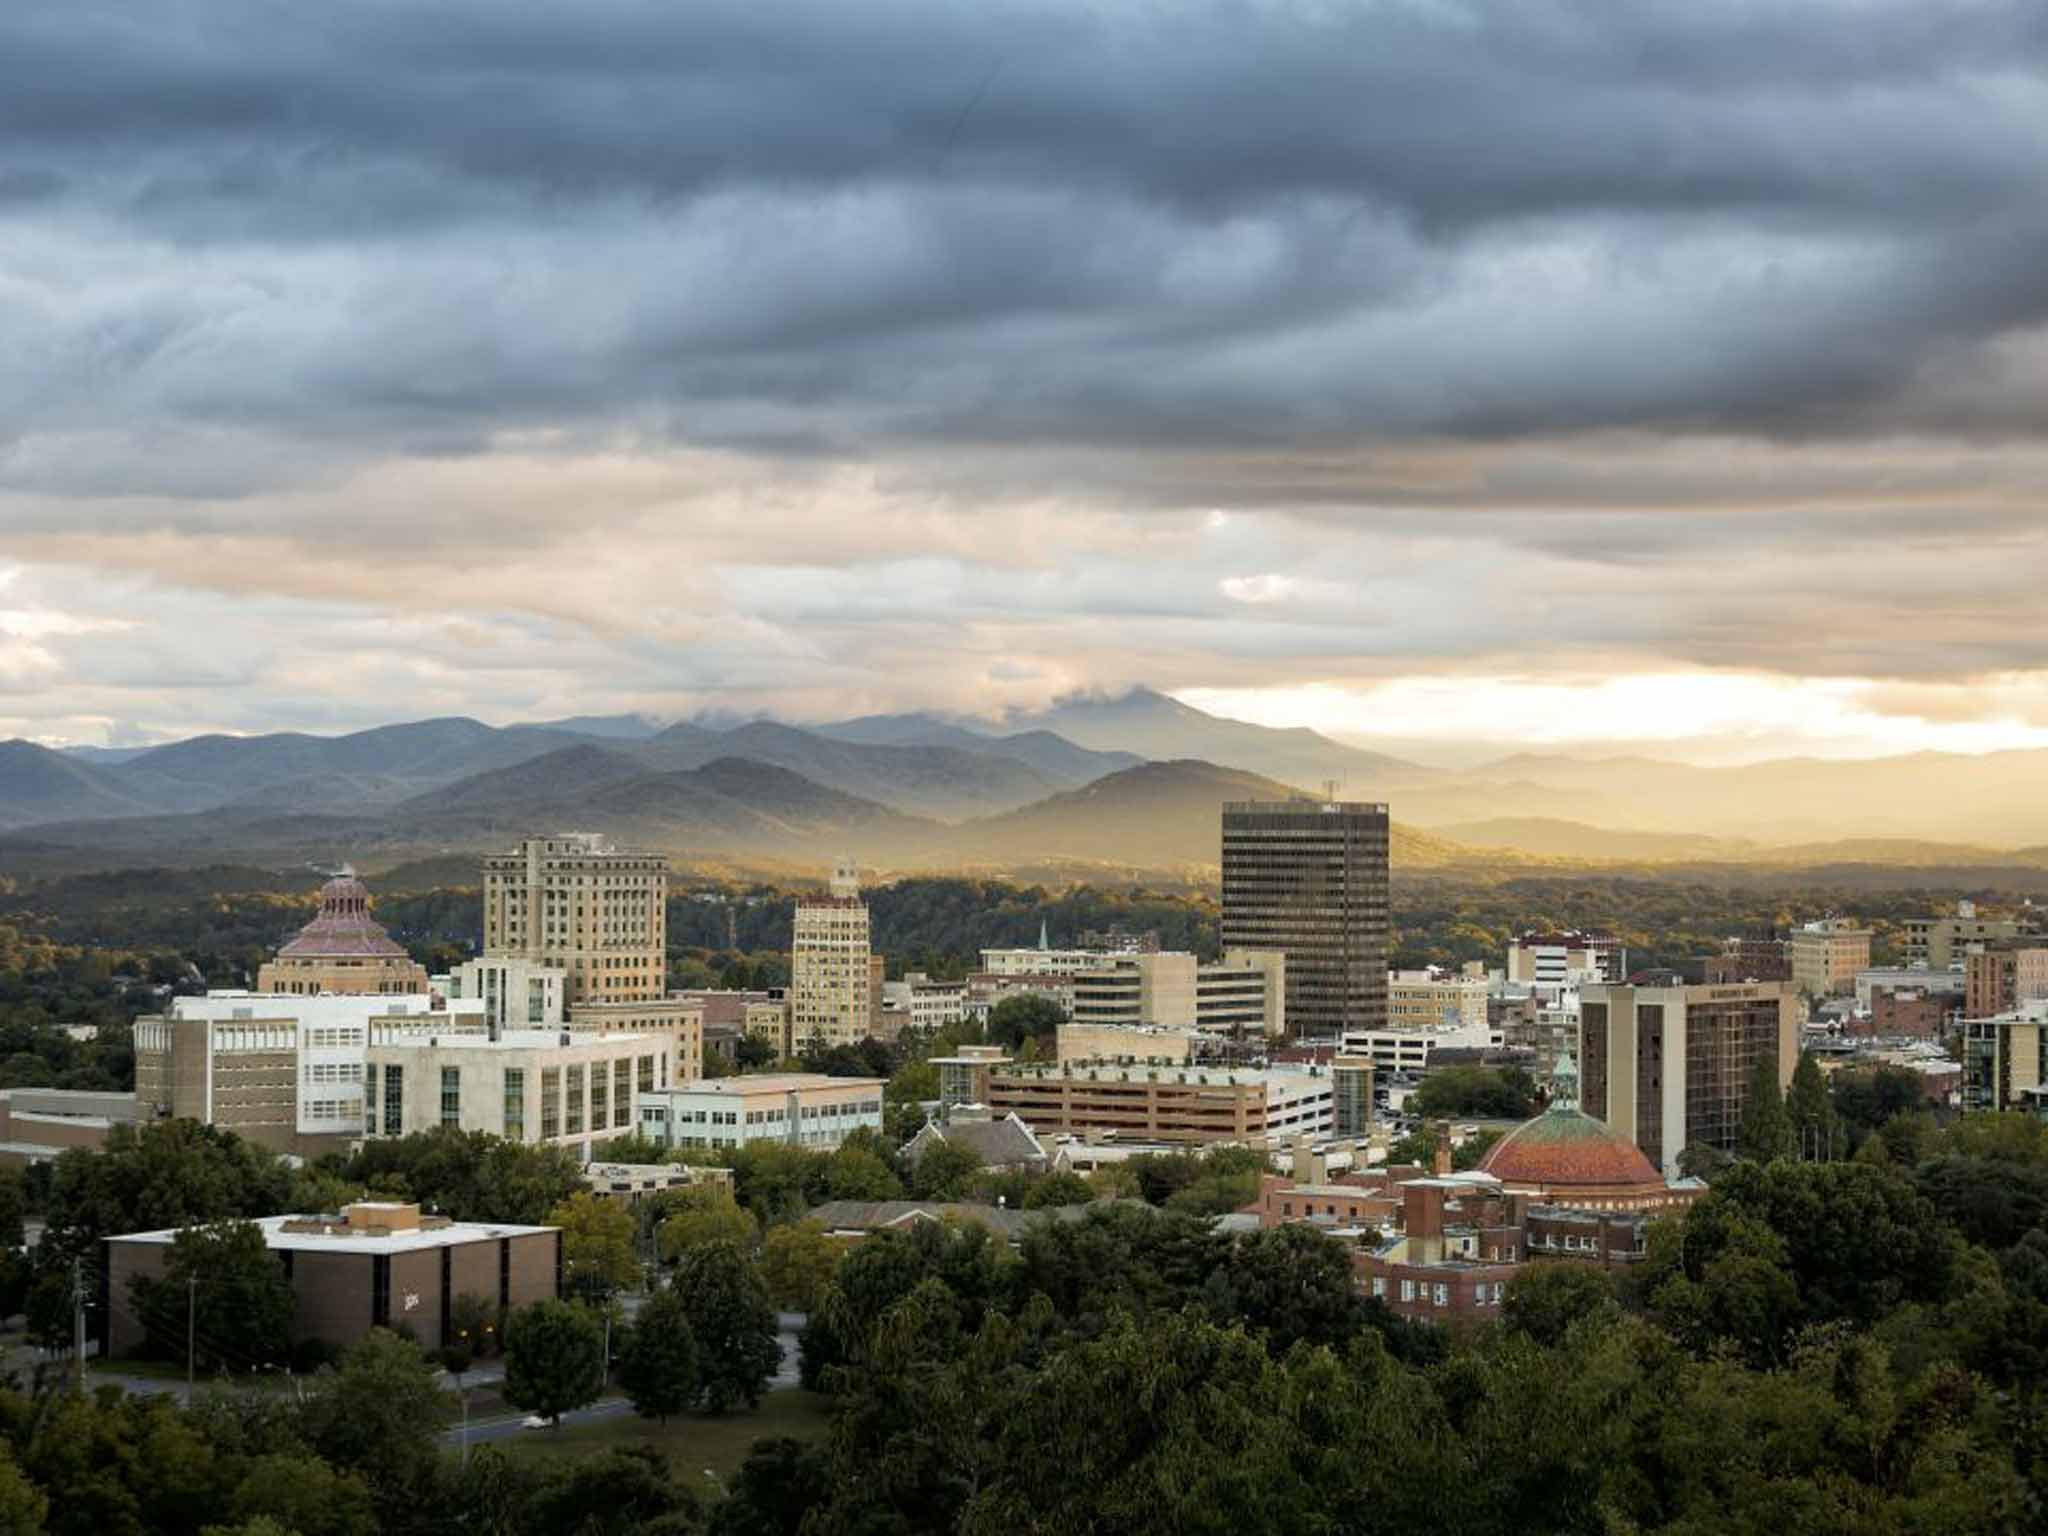 High and mighty: Asheville is a city in North Carolina’s Blue Ridge Mountains